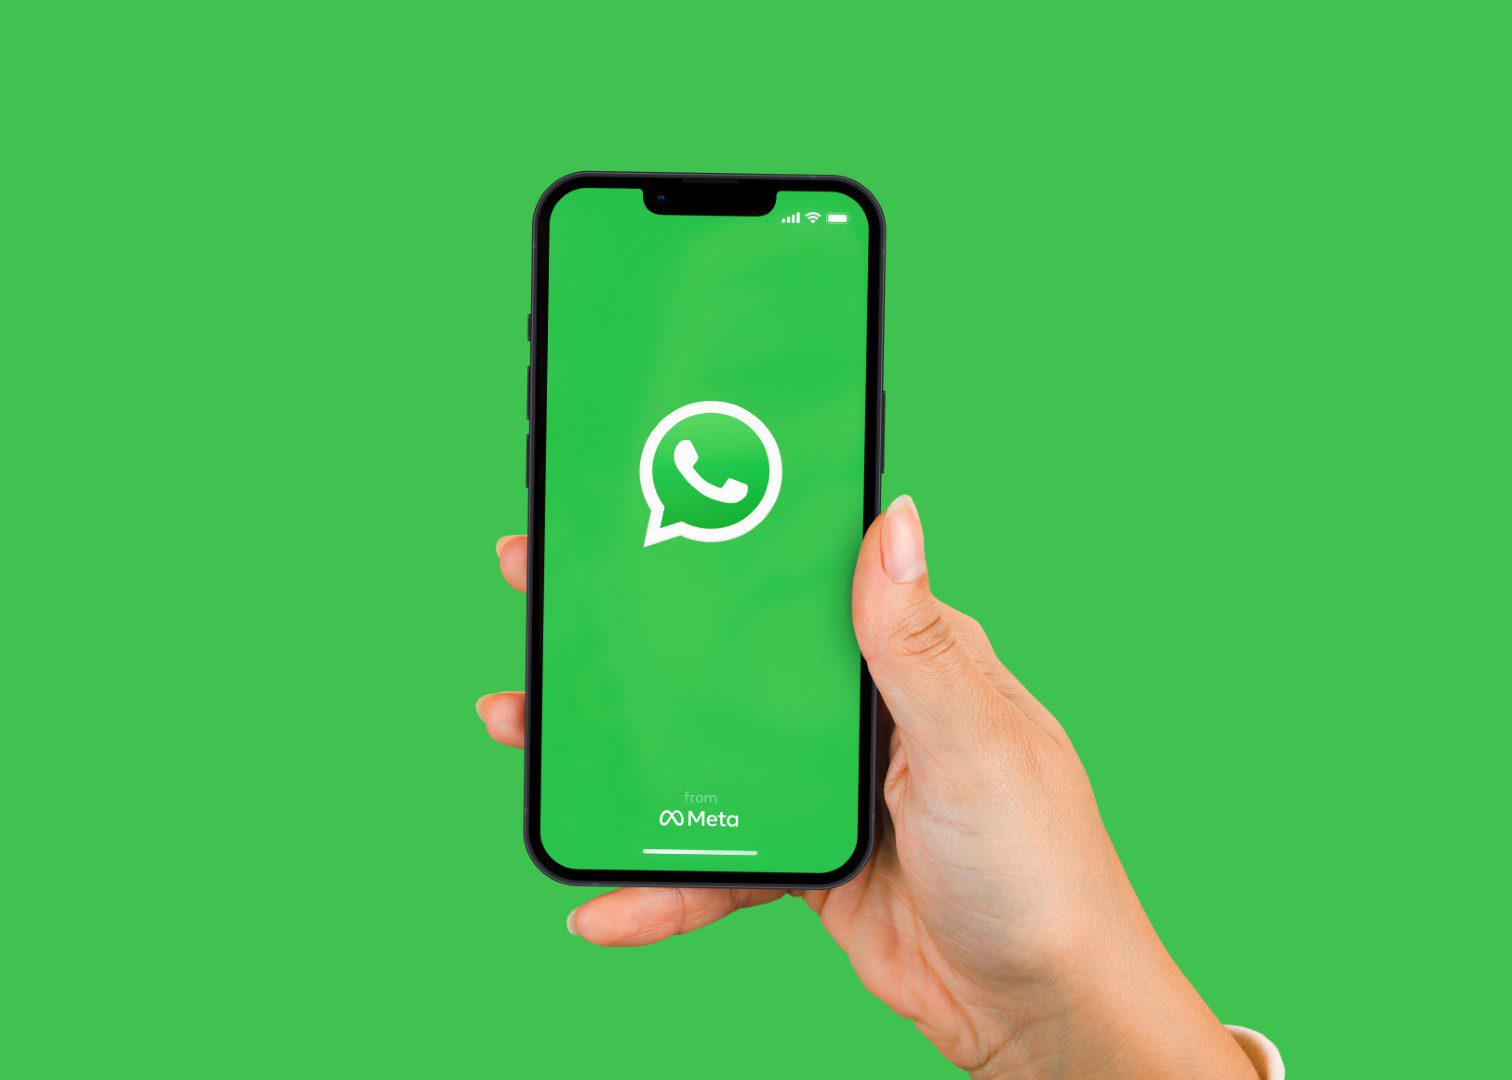 This is how you can recover deleted WhatsApp messages